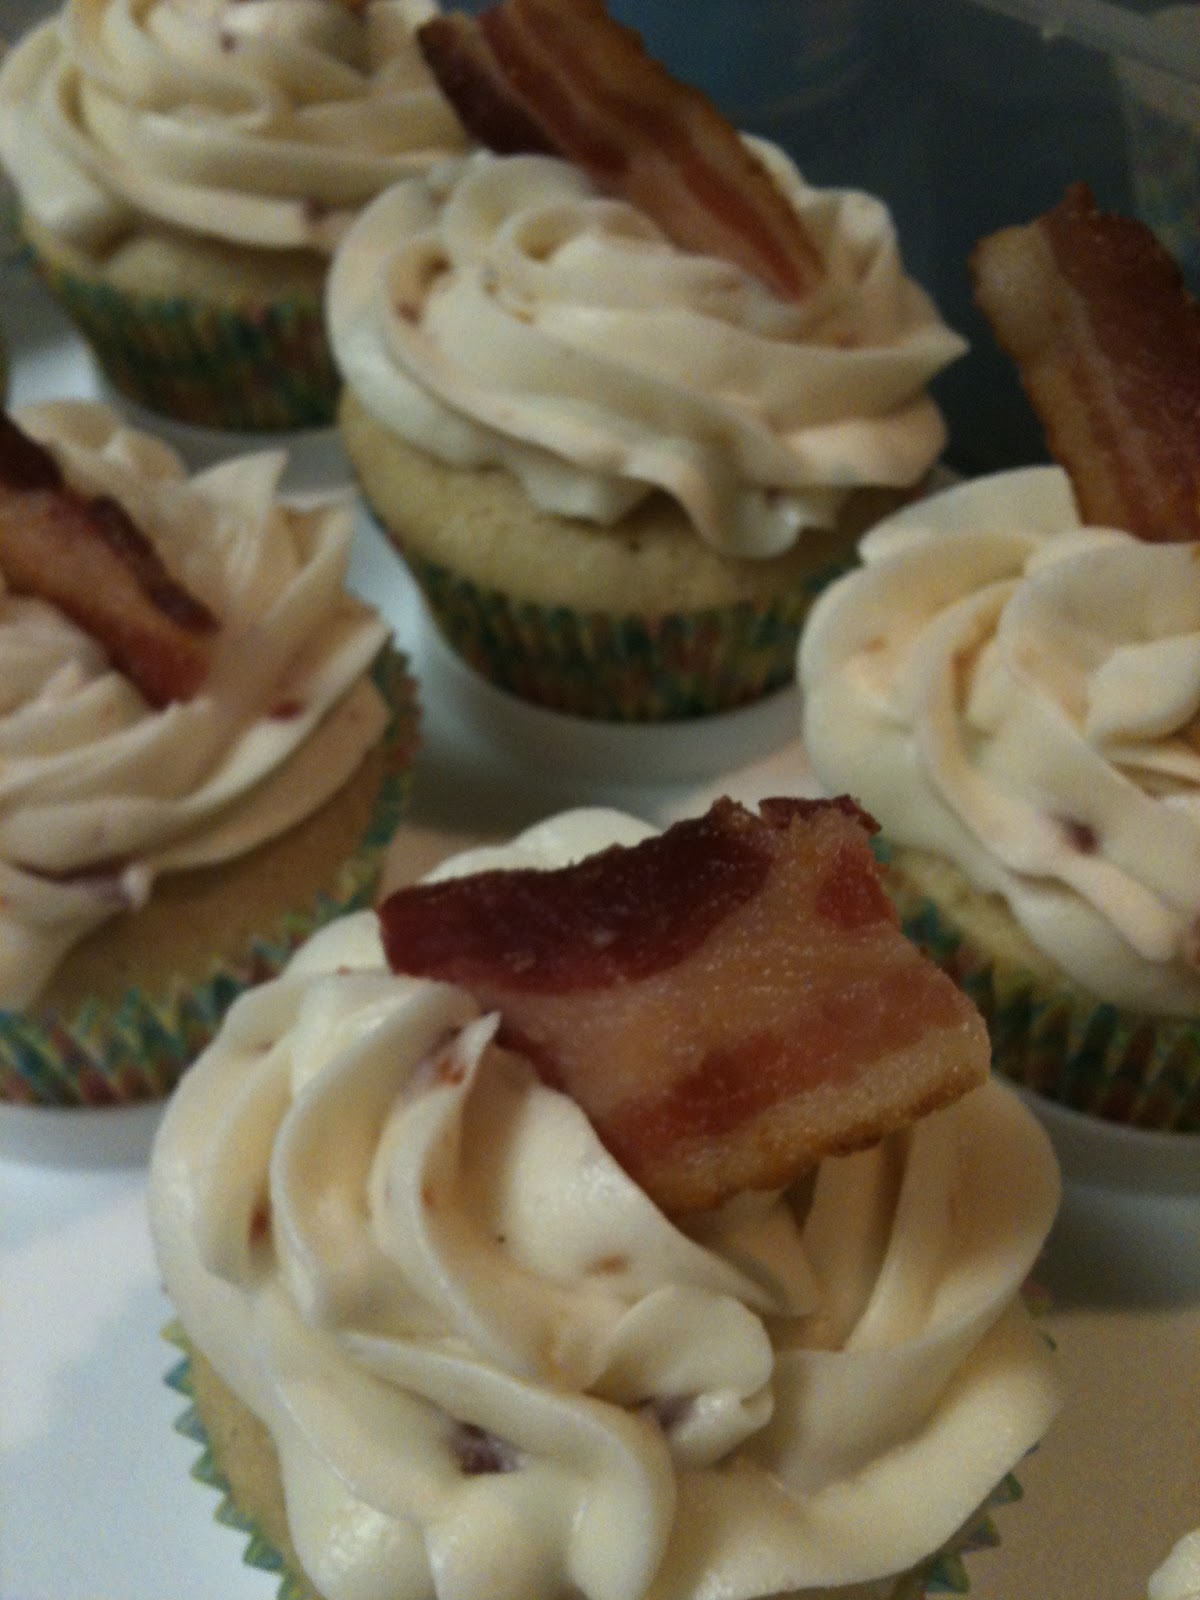 It's Going to Be Legen...wait for it....dary: Maple Bacon Cupcakes